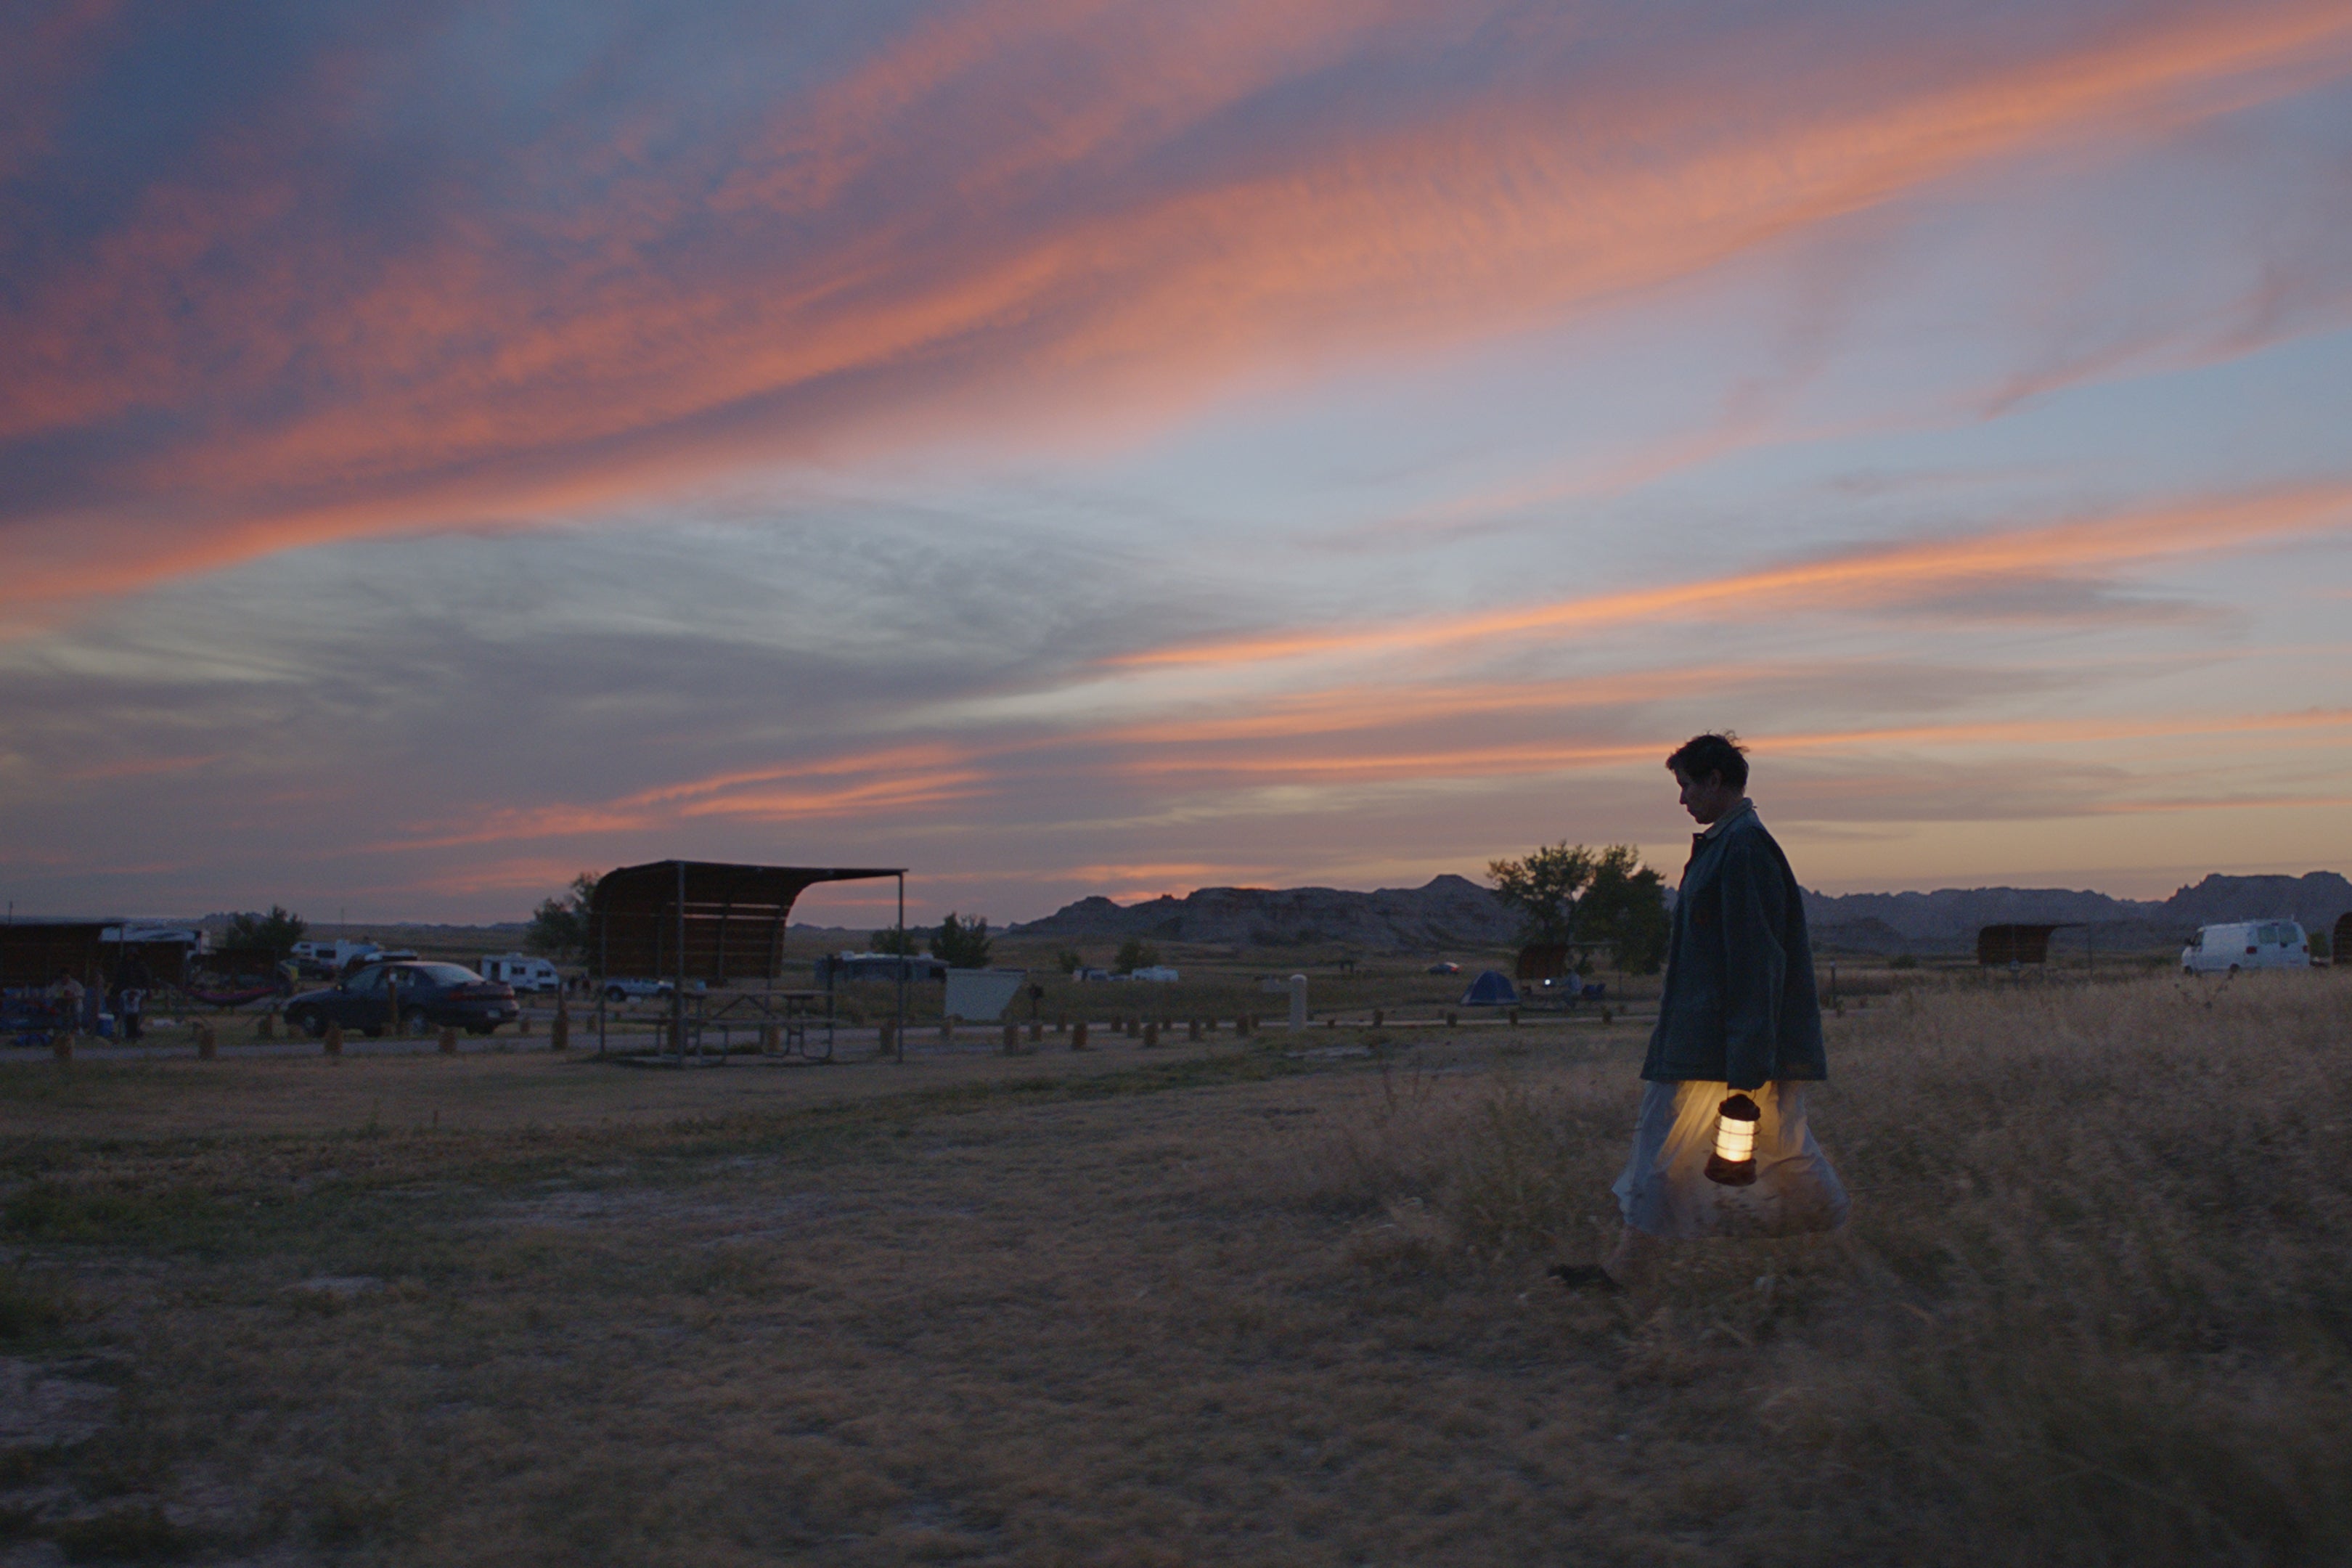 She walks through the brush near a rural parking lot against a colorful sky, carrying a lantern.